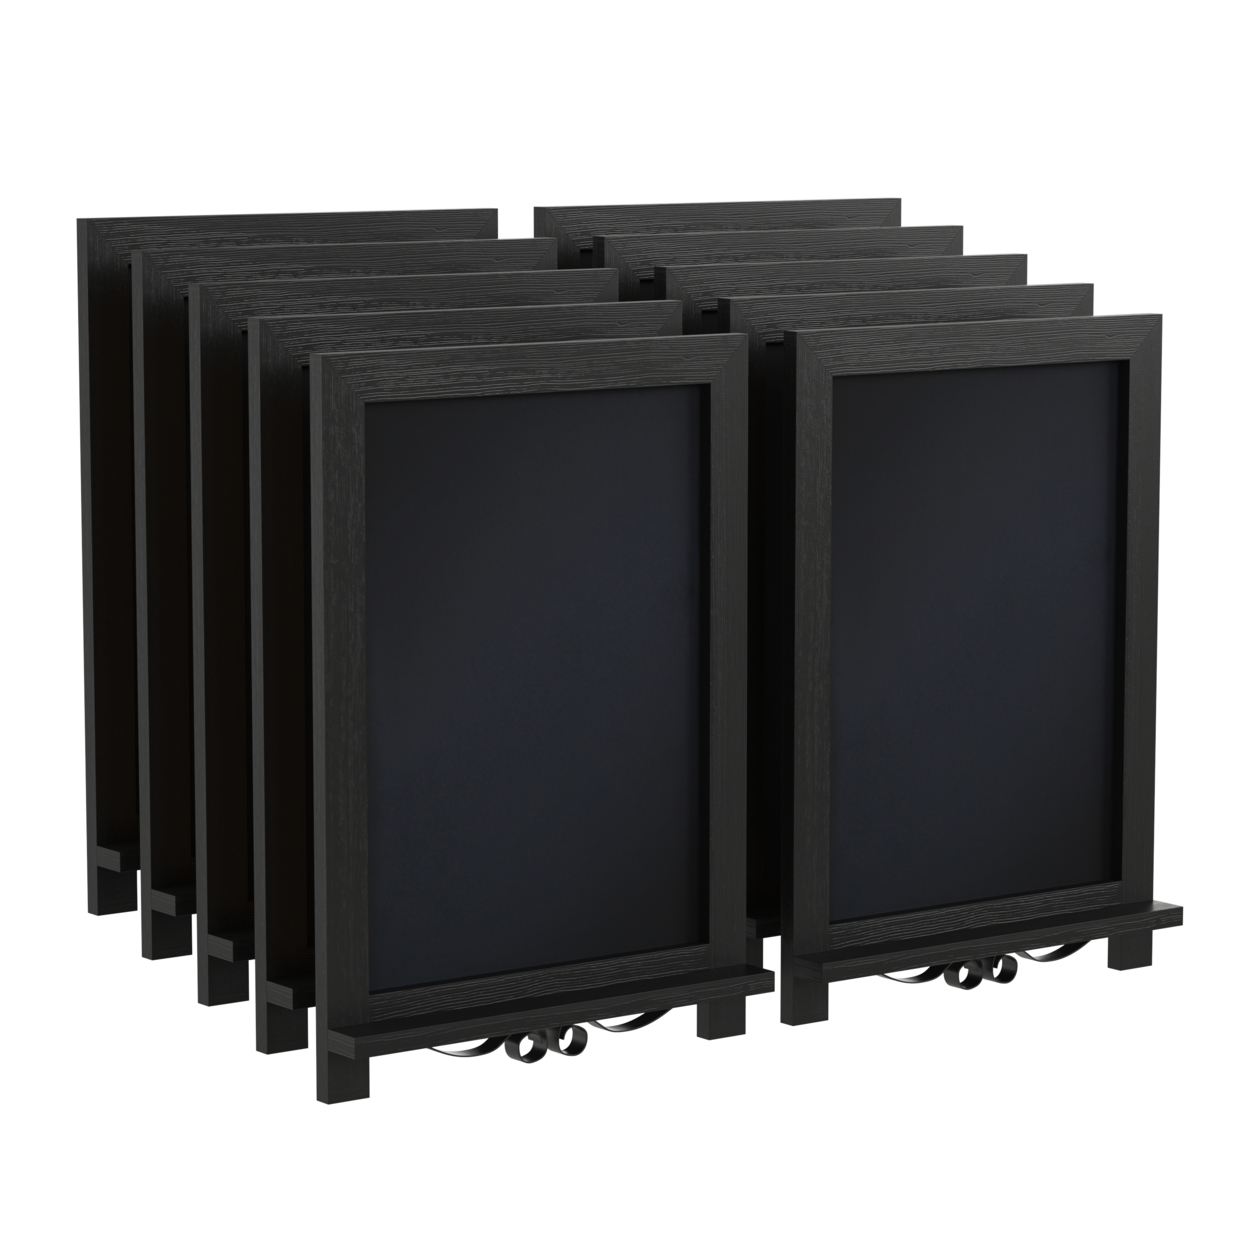 Magnetic Chalkboard With Scrolled Metal Legs, Set Of 10, Classic Black Wood